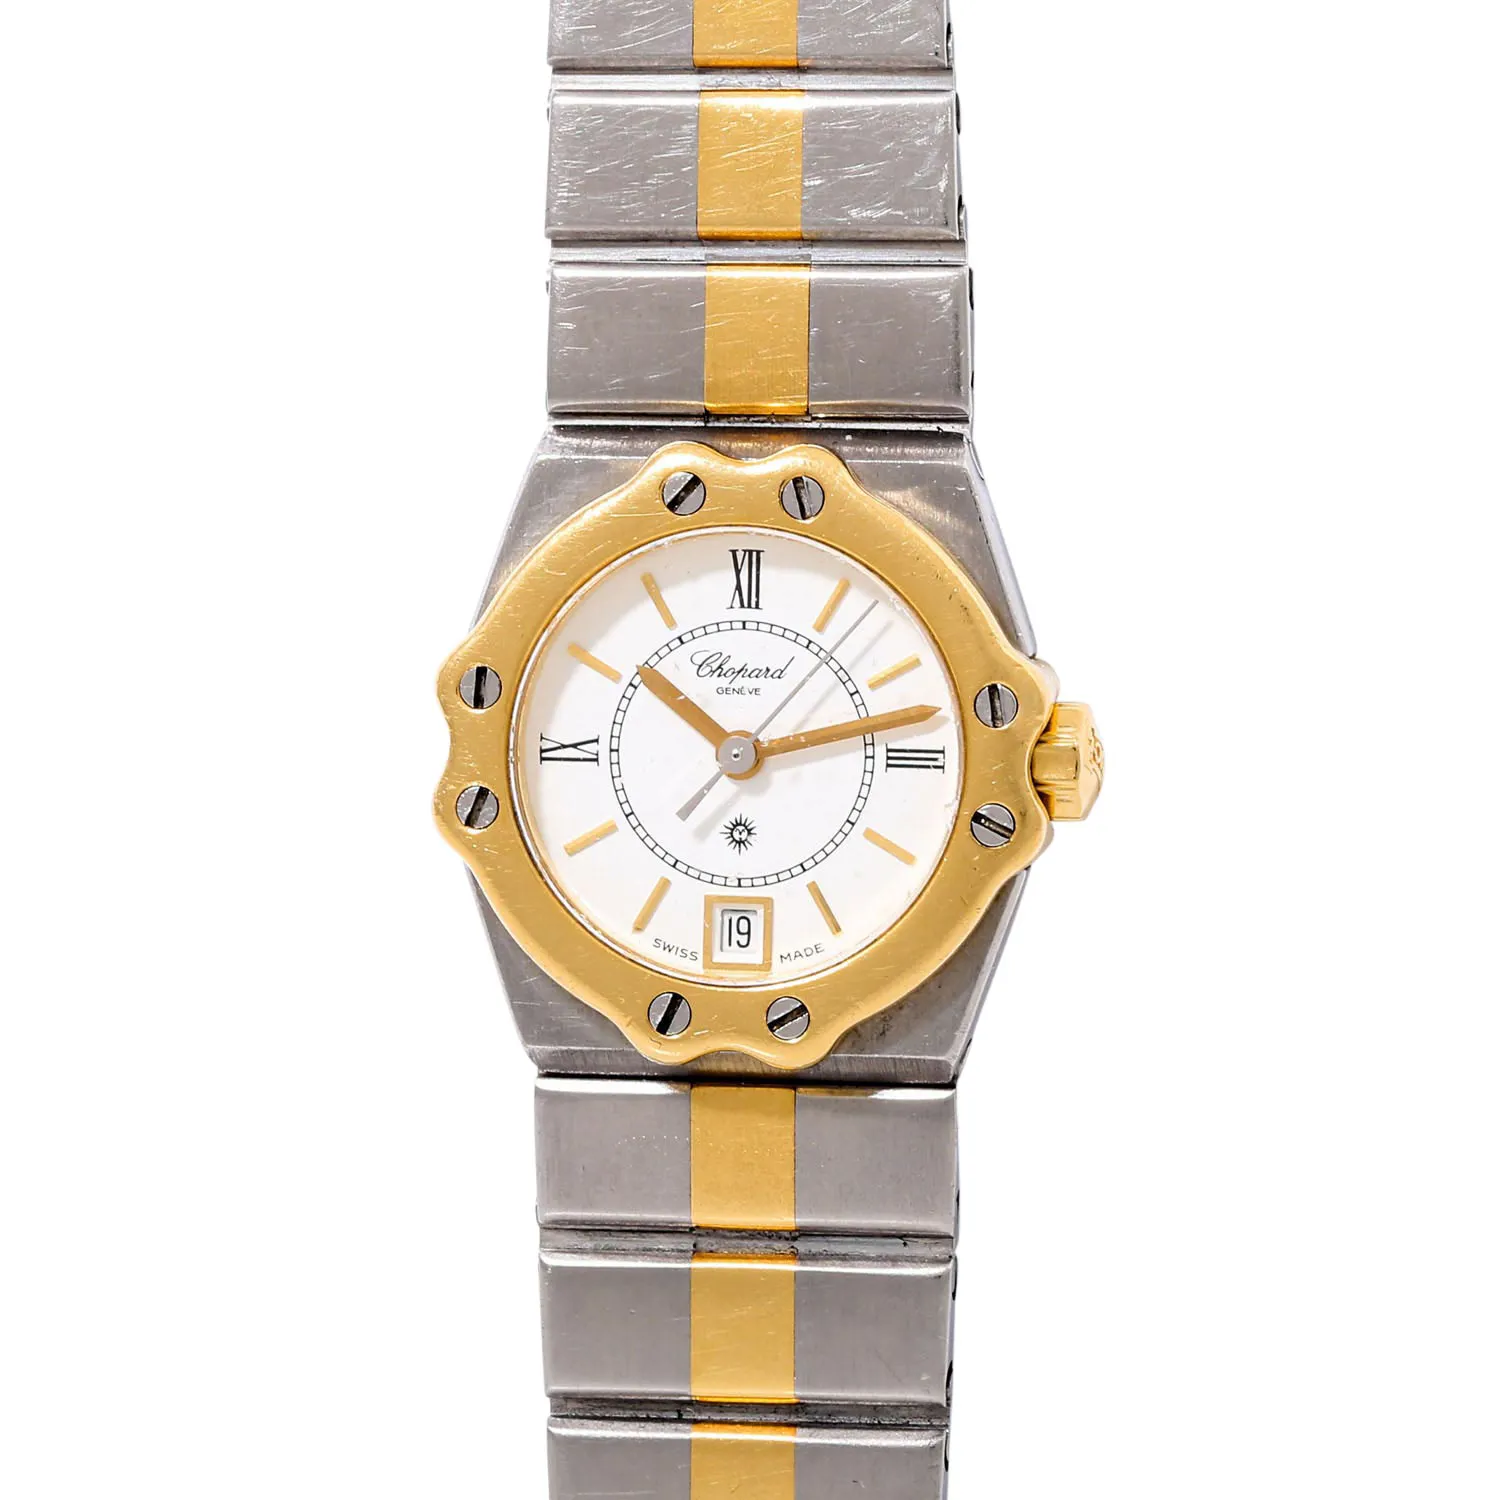 Chopard St. Moritz 8024 nullmm Yellow gold and stainless steel White